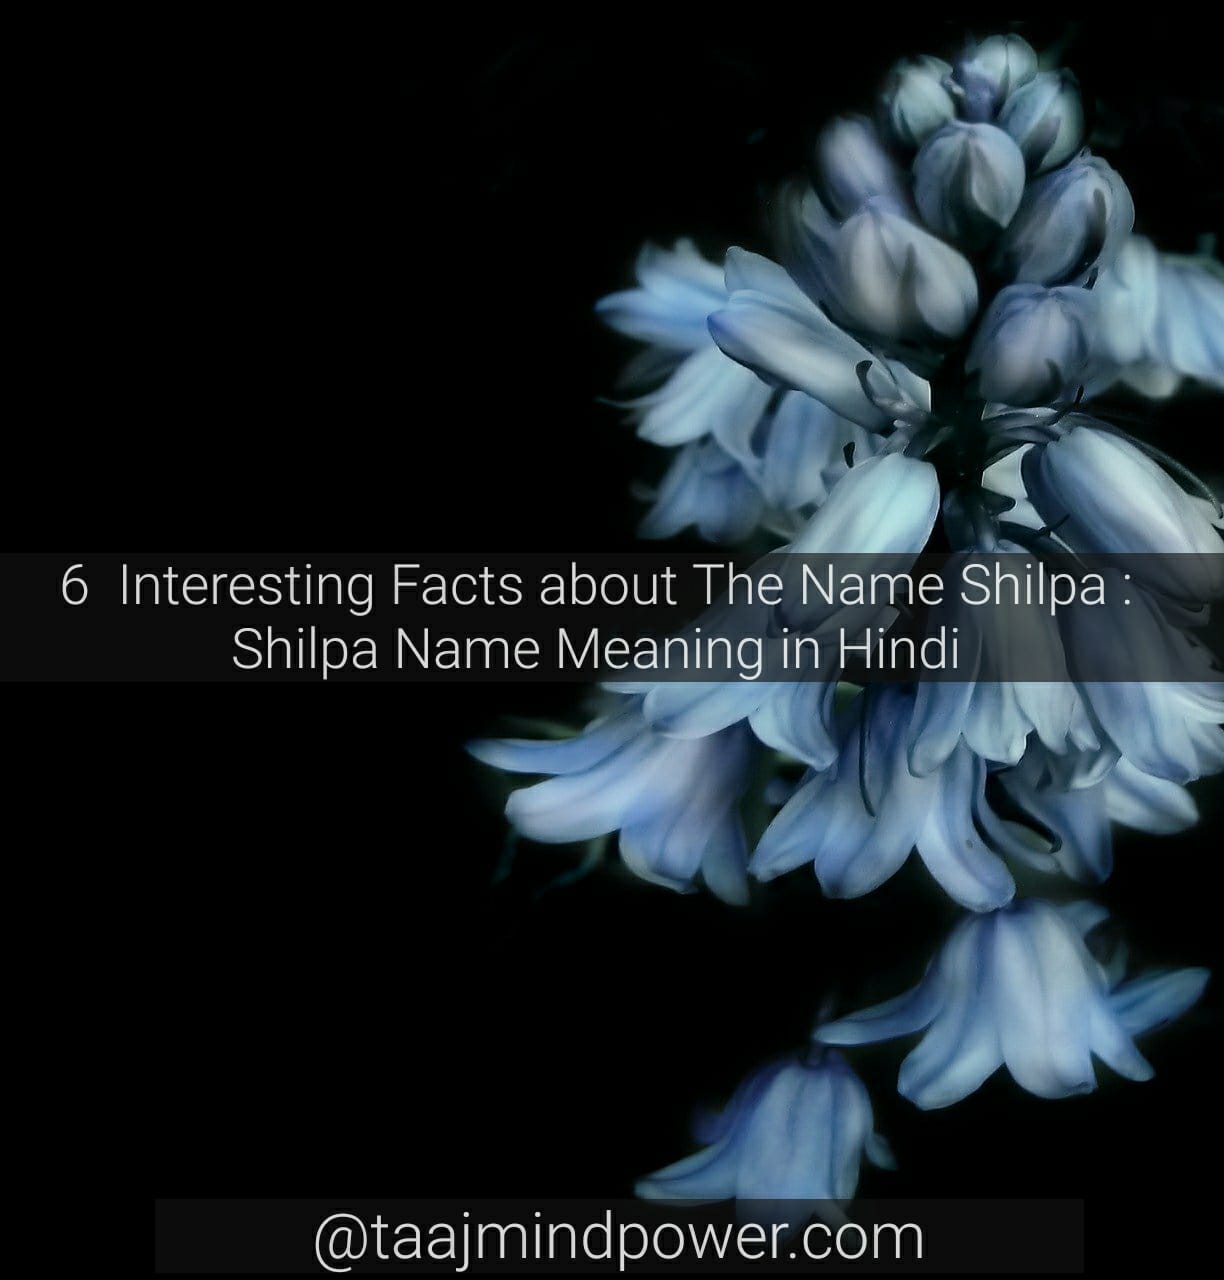 Shilpa Name Meaning in Hindi